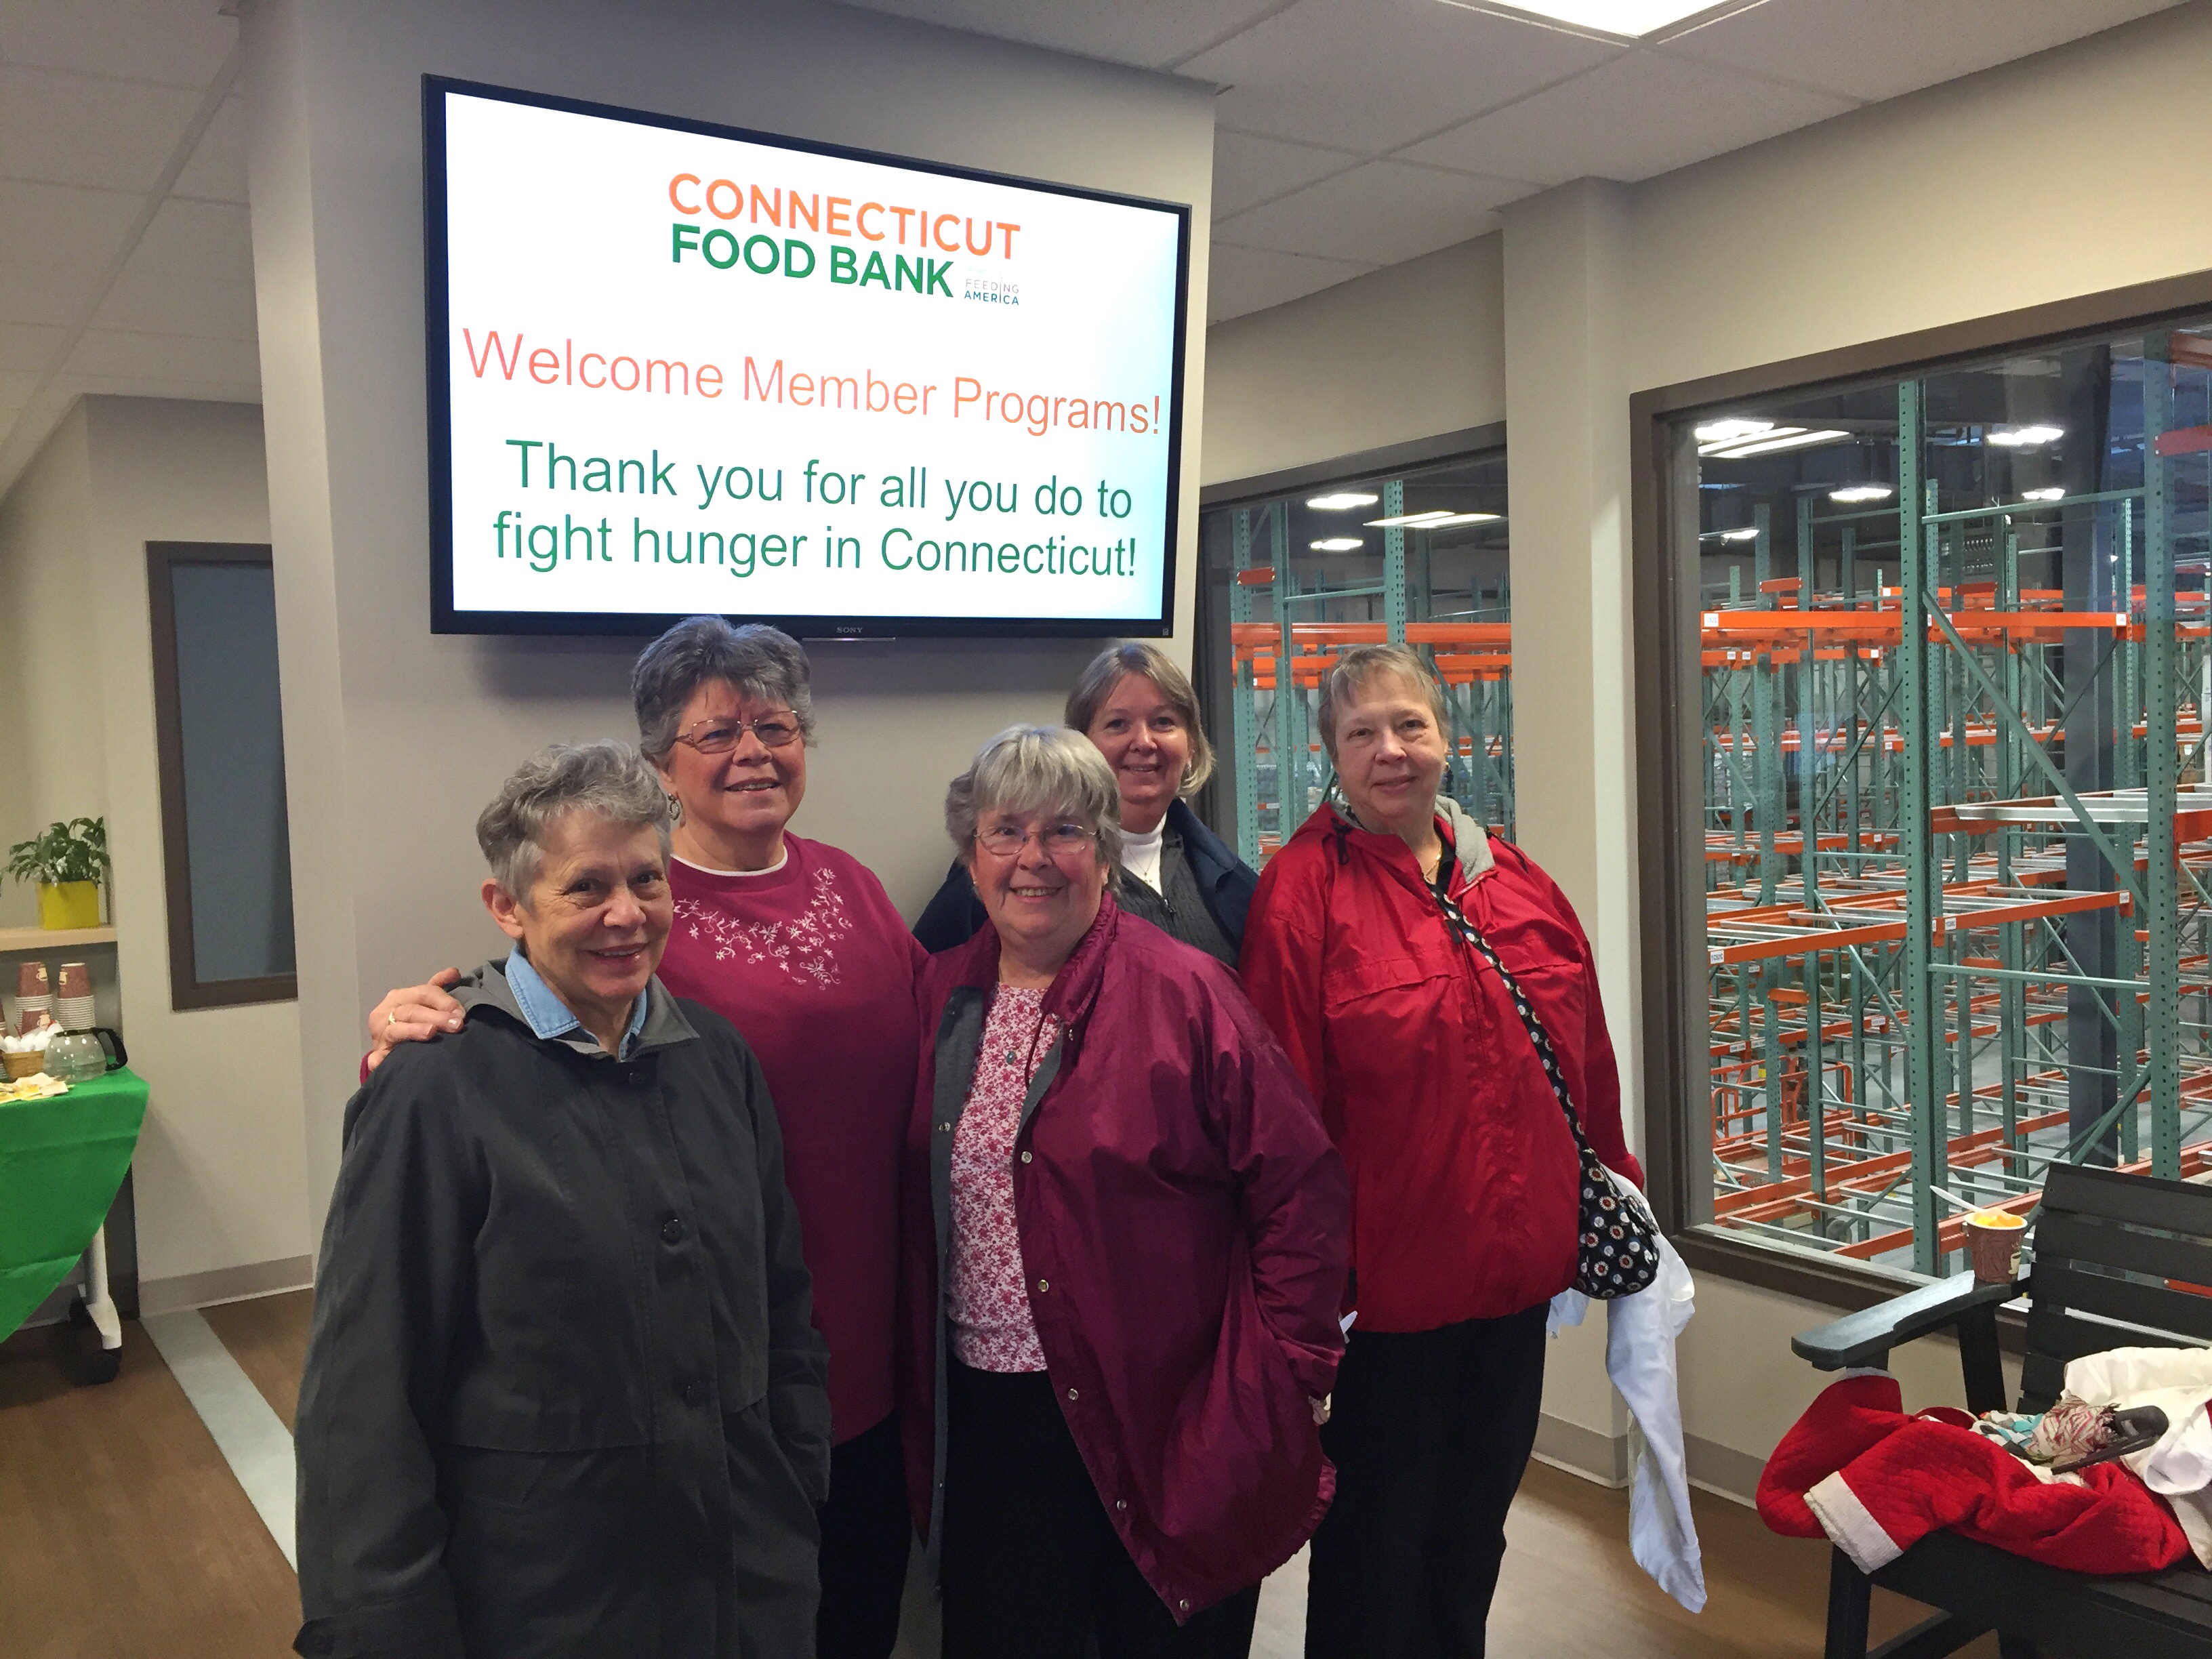 A team from the Ecumenical Food Bank in Naugatuck visited the Connecticut Food Bank Member Programs Open House November 12.